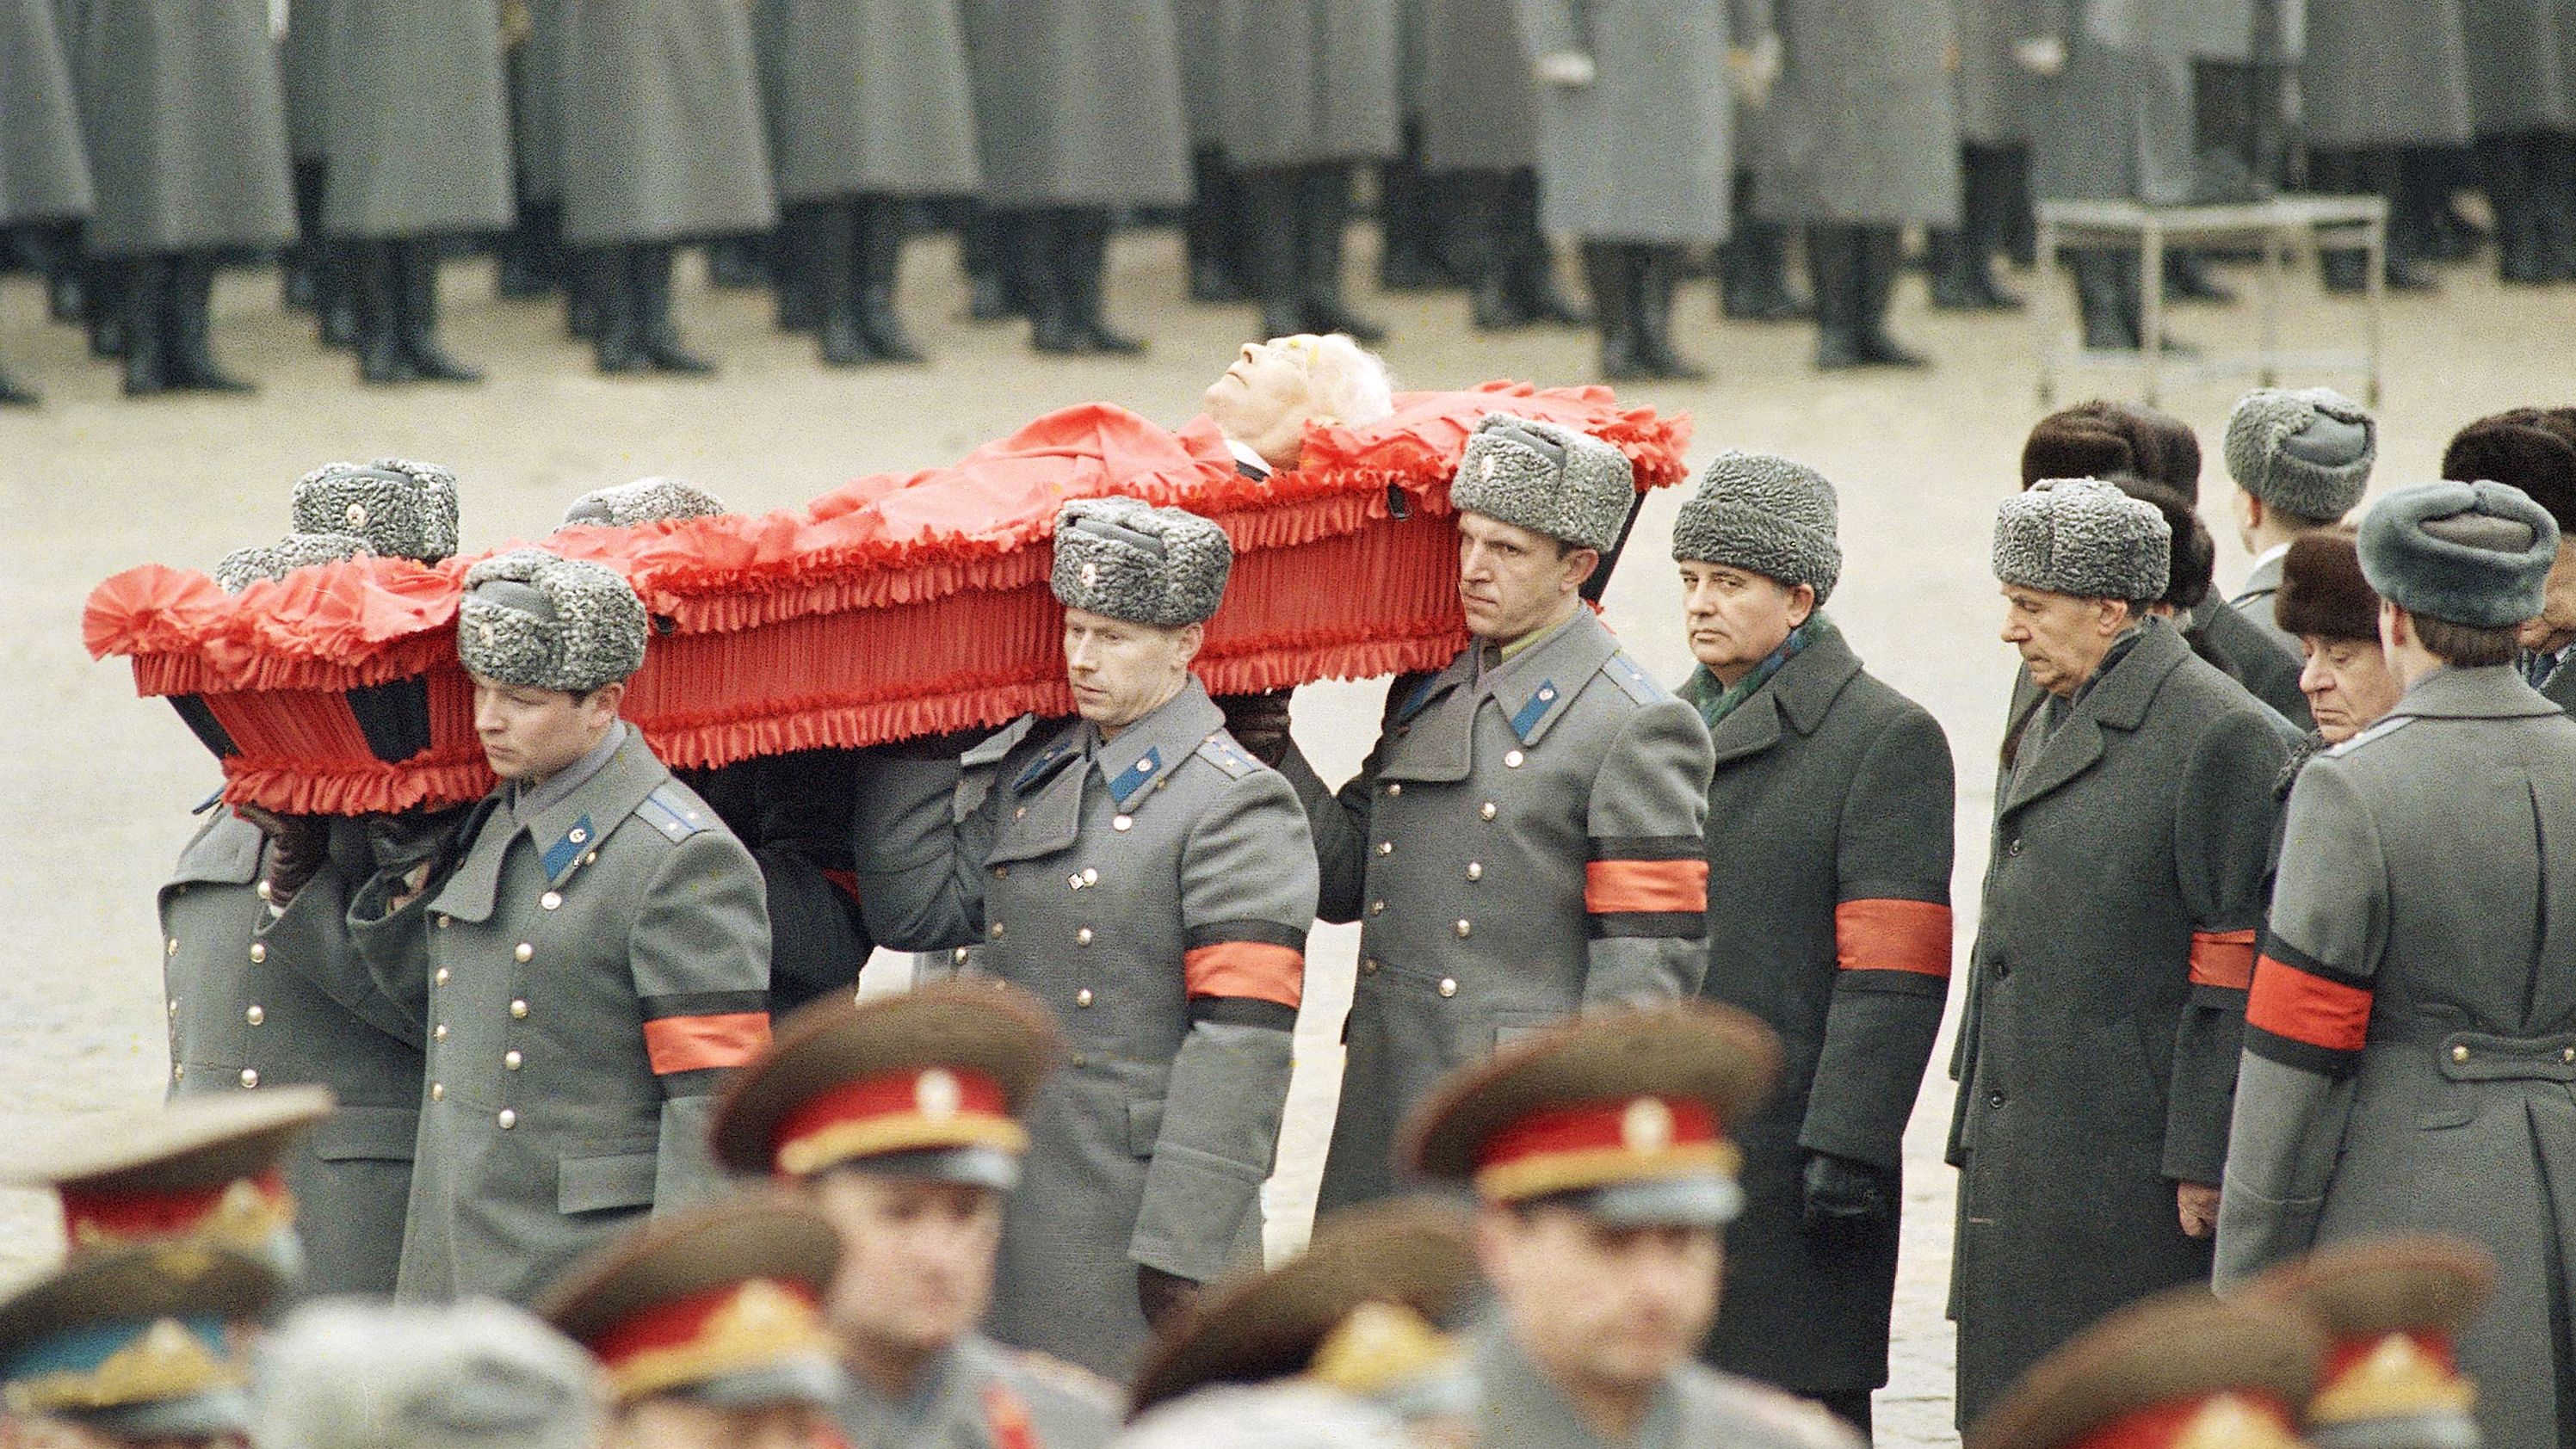 Gorbachev follows pallbearers carrying the casket of his predecessor as Soviet leader, Konstantin Chernenko, in Moscow's Red Square in March 1985.